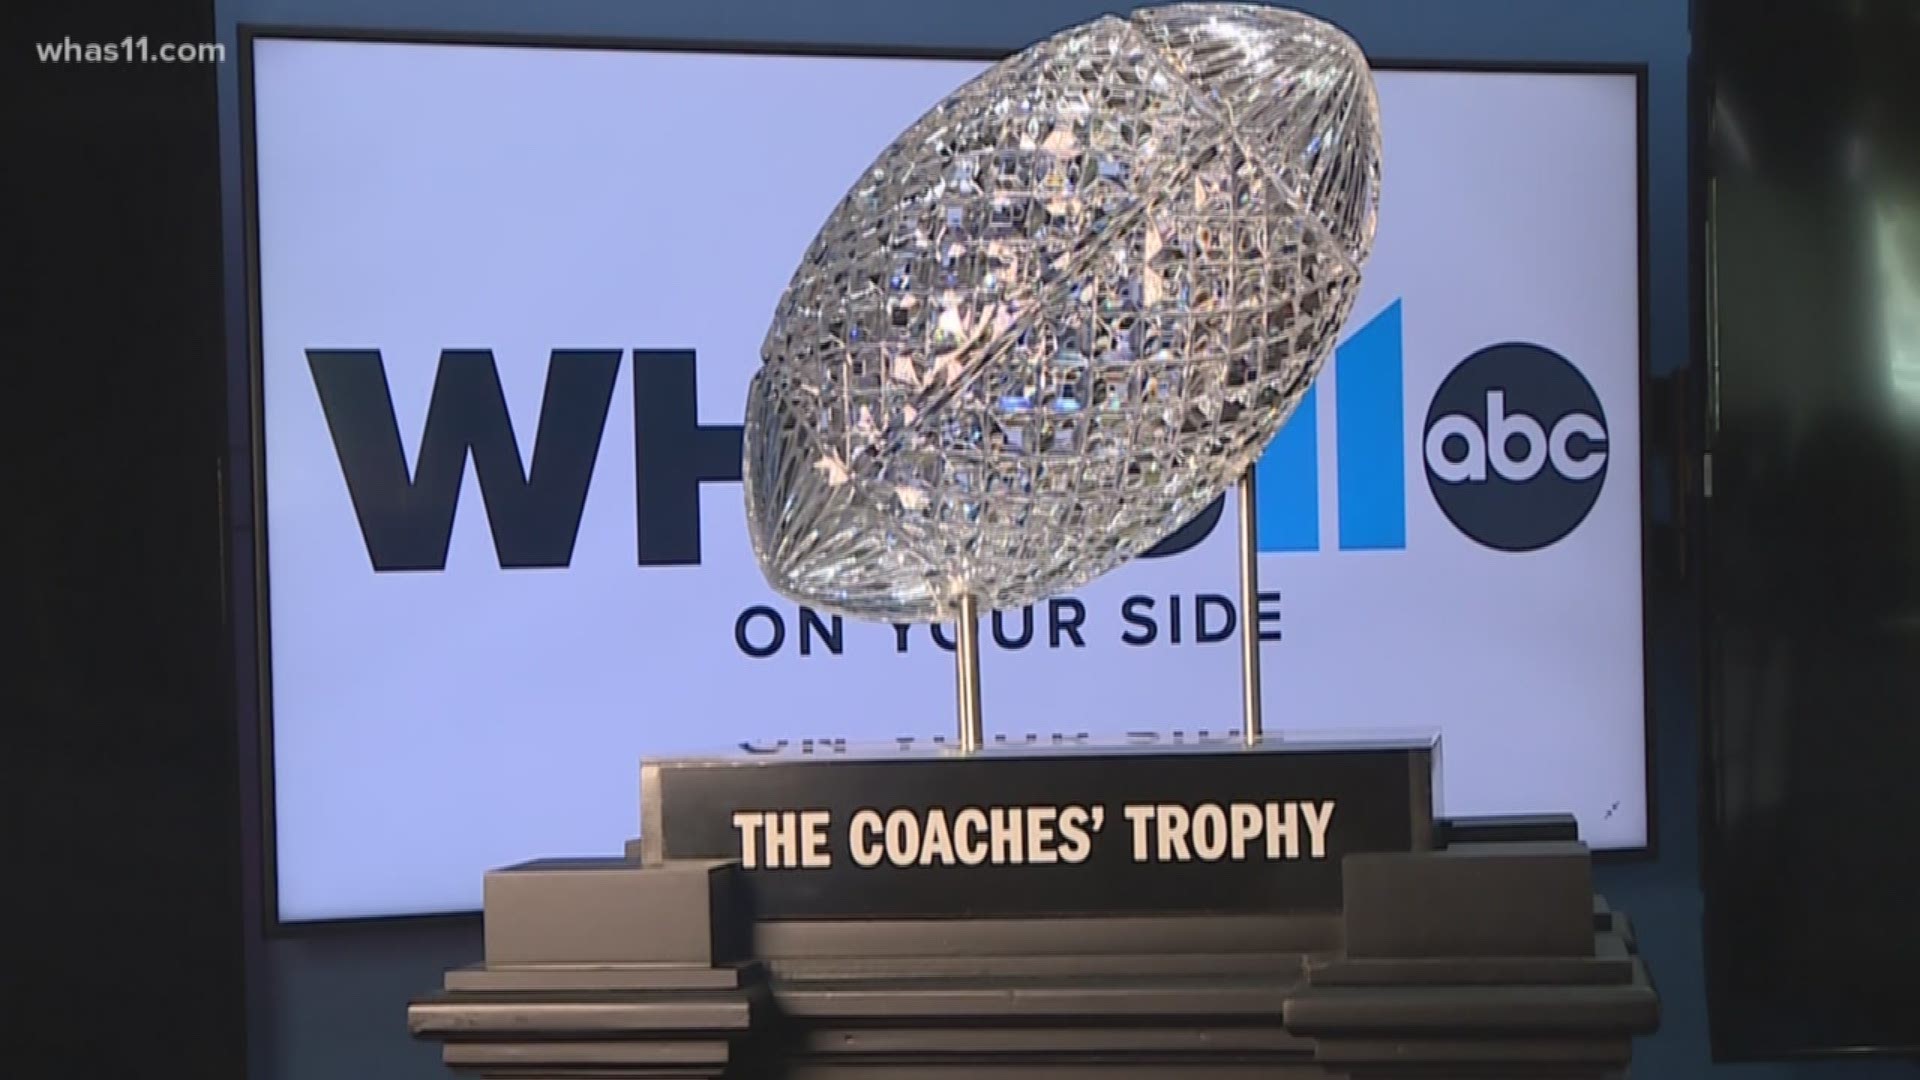 The trophy has been given out since 1986 to the top team in the final coaches’ poll.